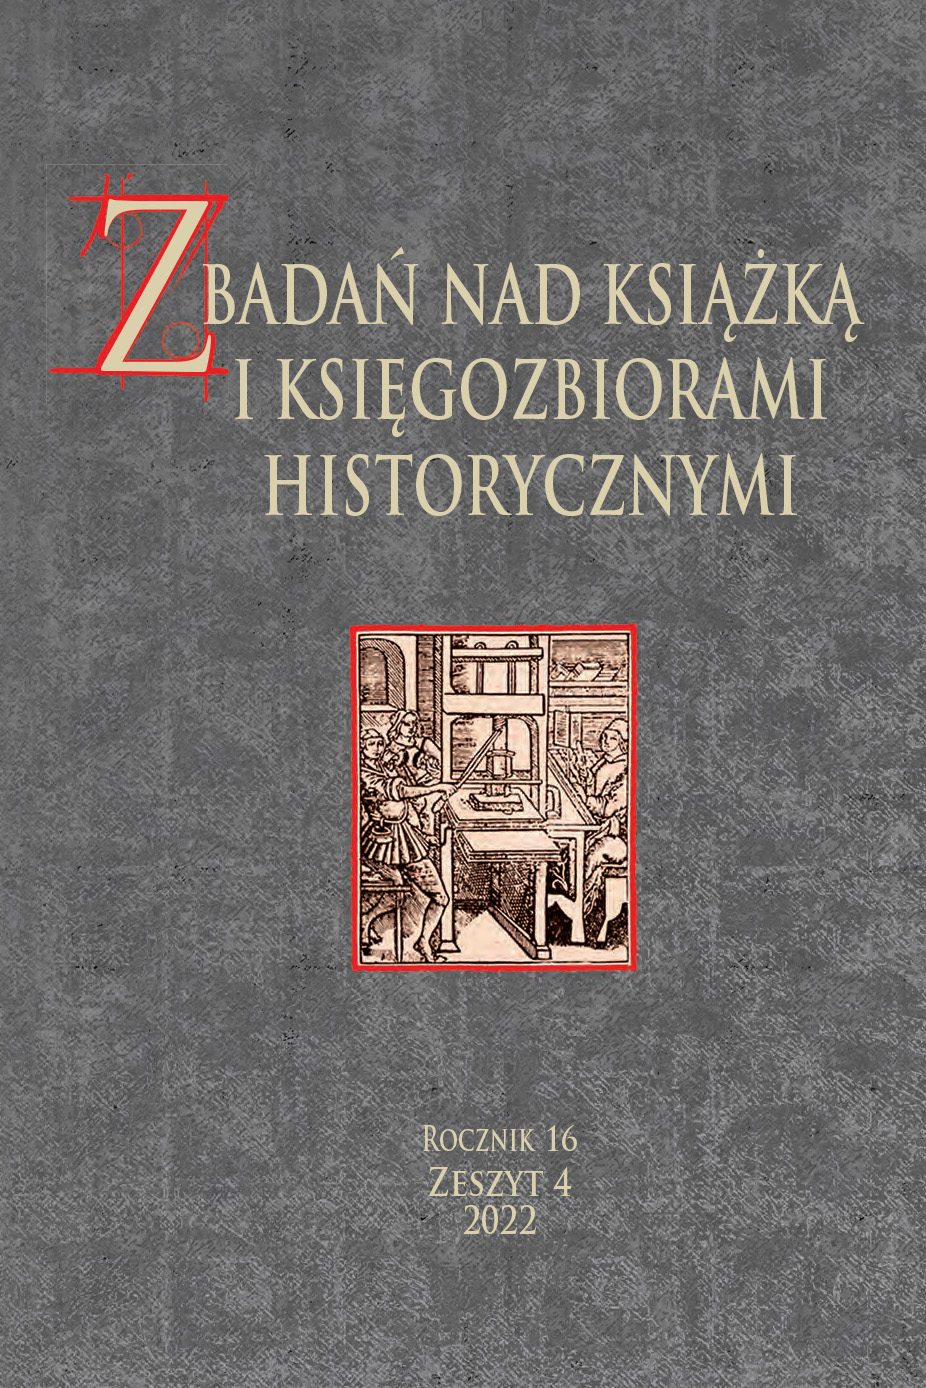 Cyrillic parchments MS Fragm. 244 from the Сollection
of the Archdiocese Archives in Gniezno Cover Image